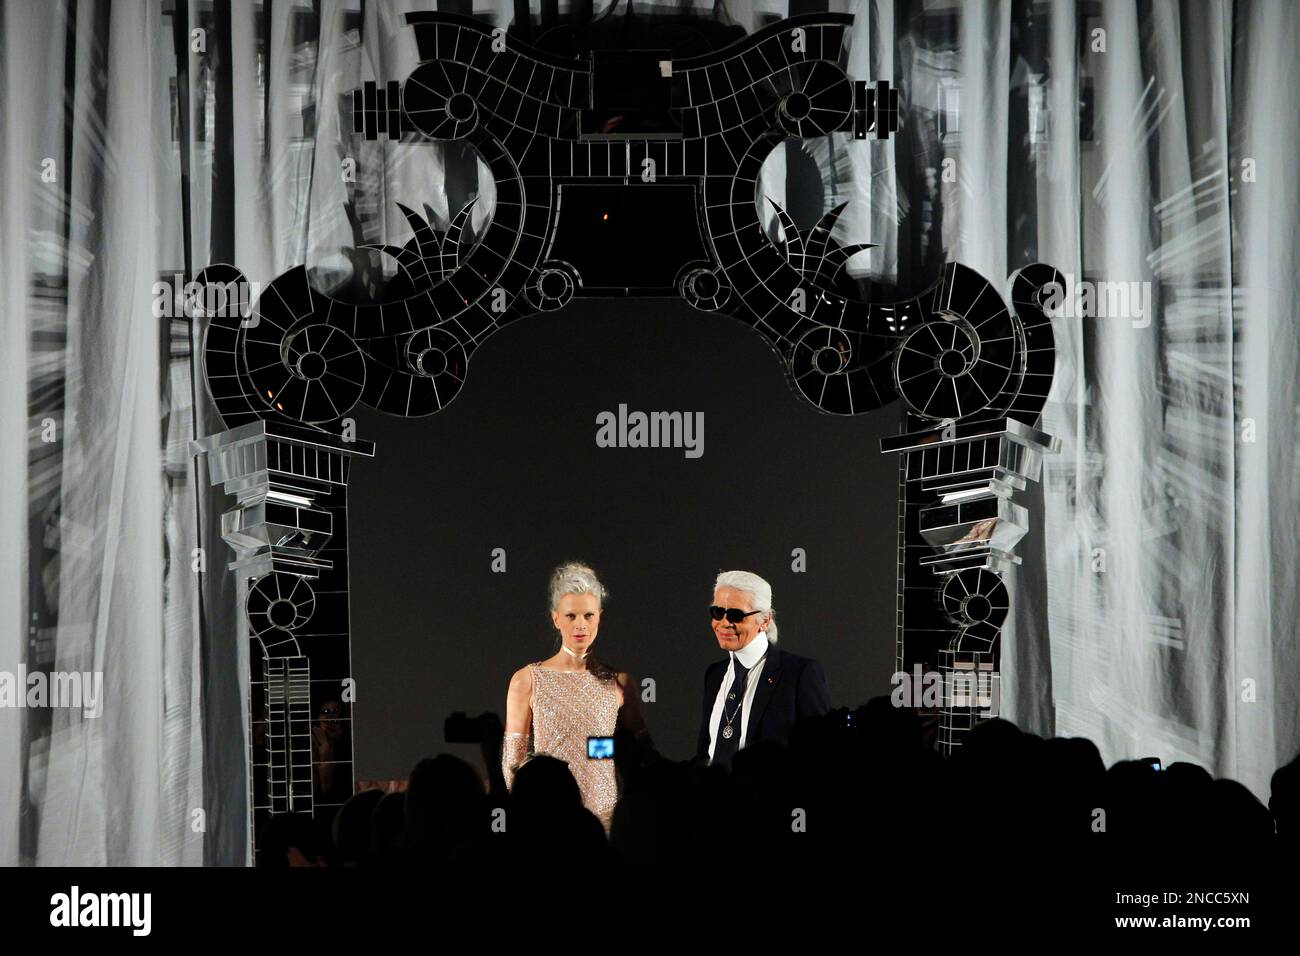 German designer Karl Lagerfeld, right, and a model acknowledge